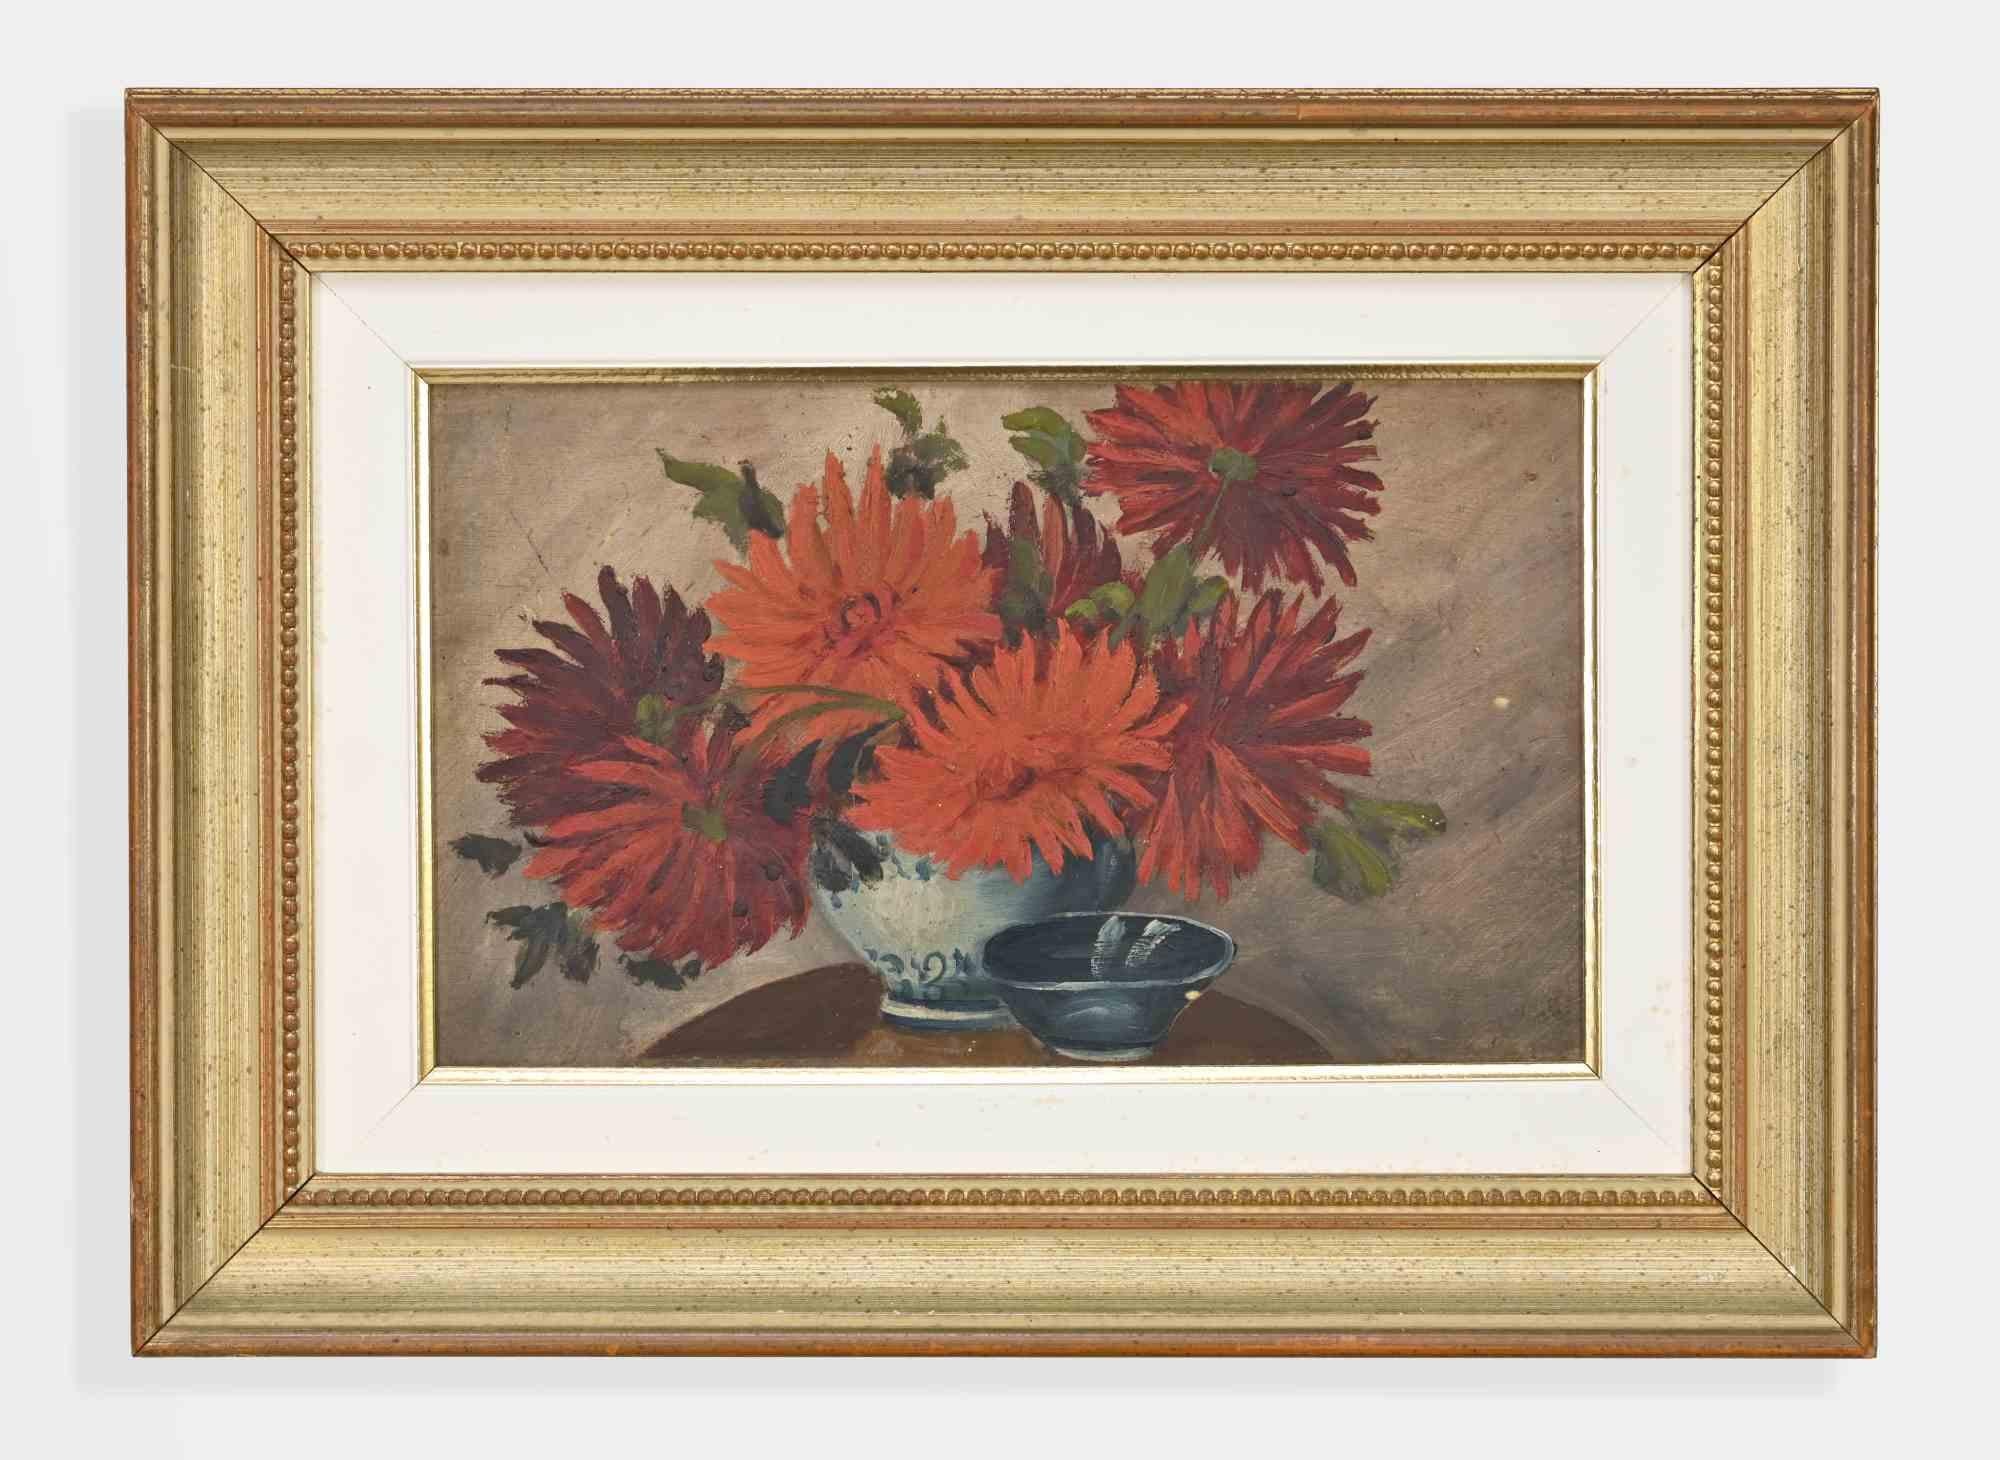 Still Life with Flowers  - Oil Paint - Mid-20th Century